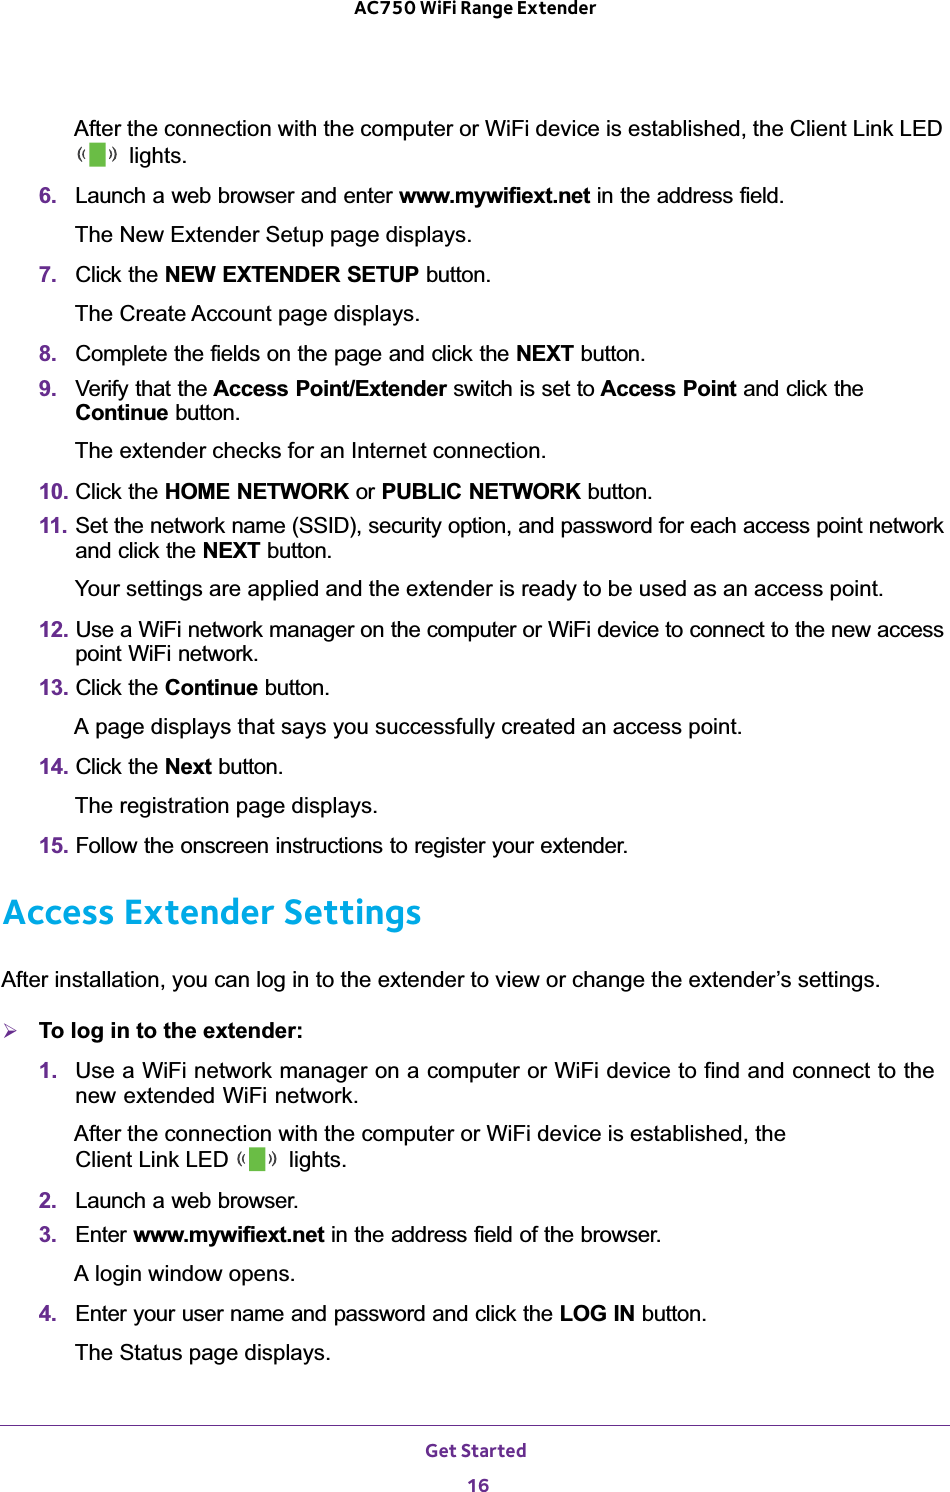 Get Started 16AC750 WiFi Range Extender After the connection with the computer or WiFi device is established, the Client Link LED  lights.6.  Launch a web browser and enter www.mywifiext.net in the address field.The New Extender Setup page displays.7.  Click the NEW EXTENDER SETUP button.The Create Account page displays.8.  Complete the fields on the page and click the NEXT button.9.  Verify that the Access Point/Extender switch is set to Access Point and click the Continue button.The extender checks for an Internet connection.10. Click the HOME NETWORK or PUBLIC NETWORK button.11.  Set the network name (SSID), security option, and password for each access point network and click the NEXT button.Your settings are applied and the extender is ready to be used as an access point.12. Use a WiFi network manager on the computer or WiFi device to connect to the new access point WiFi network.13. Click the Continue button.A page displays that says you successfully created an access point.14. Click the Next button.The registration page displays.15. Follow the onscreen instructions to register your extender.Access Extender SettingsAfter installation, you can log in to the extender to view or change the extender’s settings.¾To log in to the extender:1.  Use a WiFi network manager on a computer or WiFi device to find and connect to the new extended WiFi network.After the connection with the computer or WiFi device is established, the  Client Link LED   lights.2.  Launch a web browser.3.  Enter www.mywifiext.net in the address field of the browser.A login window opens.4.  Enter your user name and password and click the LOG IN button.The Status page displays.